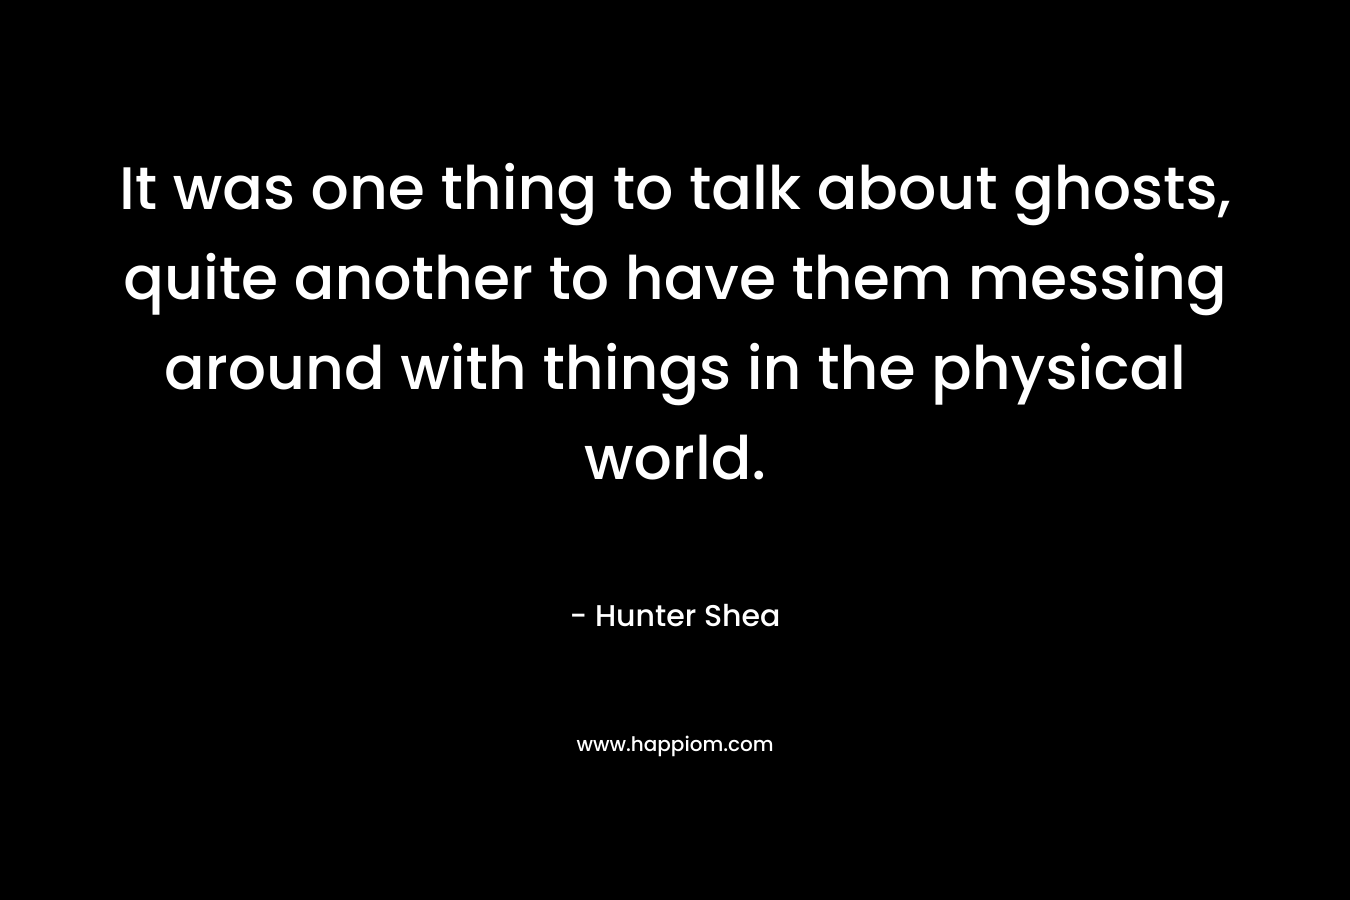 It was one thing to talk about ghosts, quite another to have them messing around with things in the physical world. – Hunter Shea